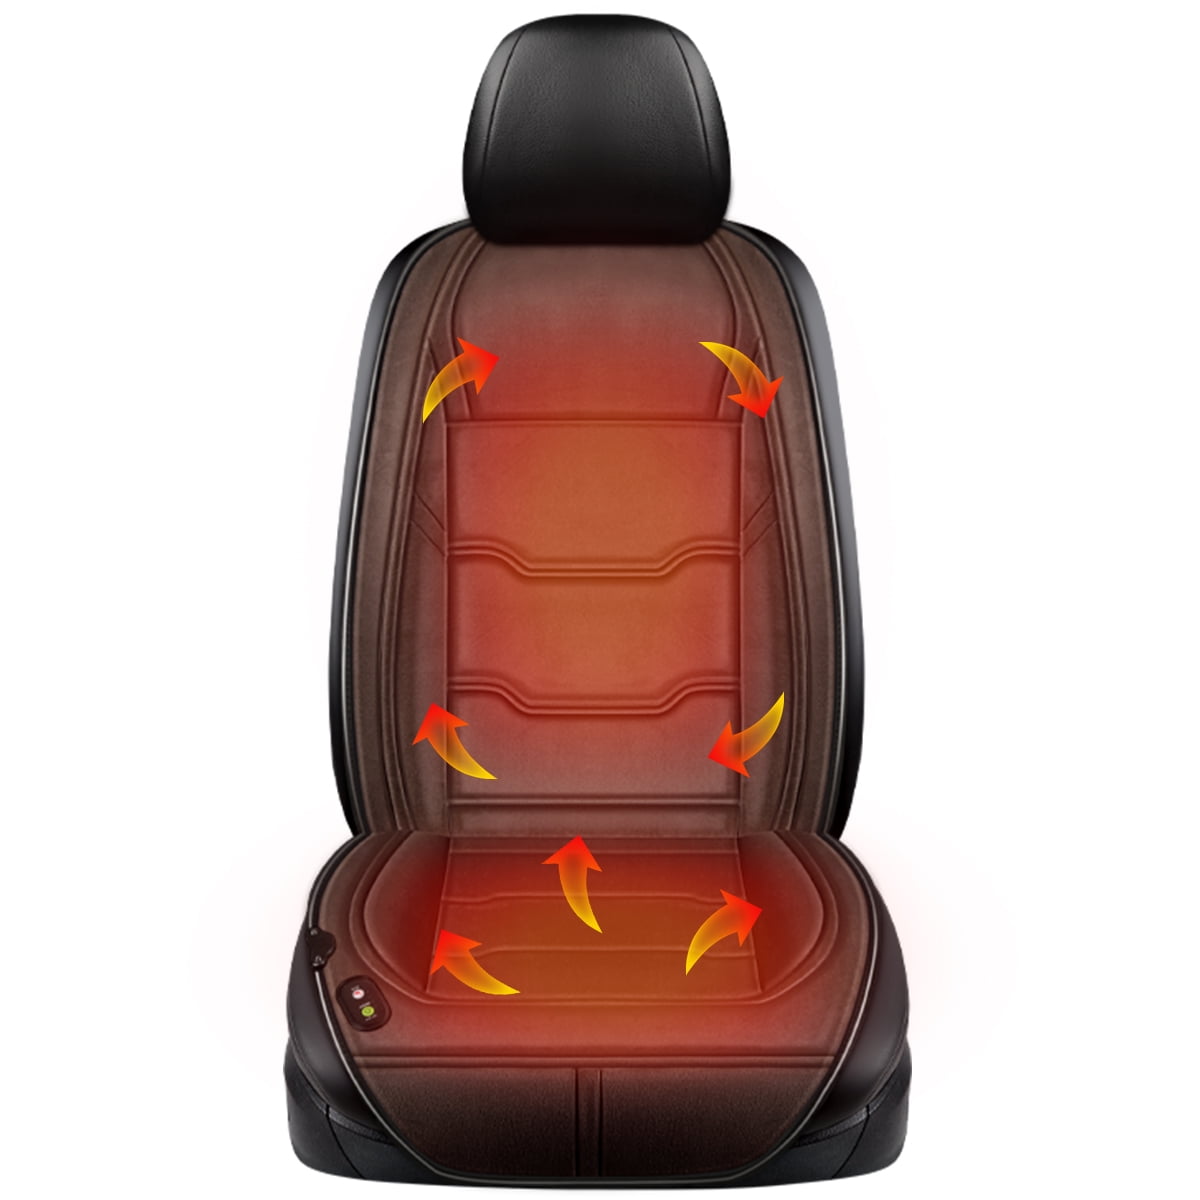 HUHU833 12V Heated Seat Cushion,USB Electric Chair Heating Pad Rechargeable,Office Chair Car Seat Cushion,Keep Warming in Winter TM 